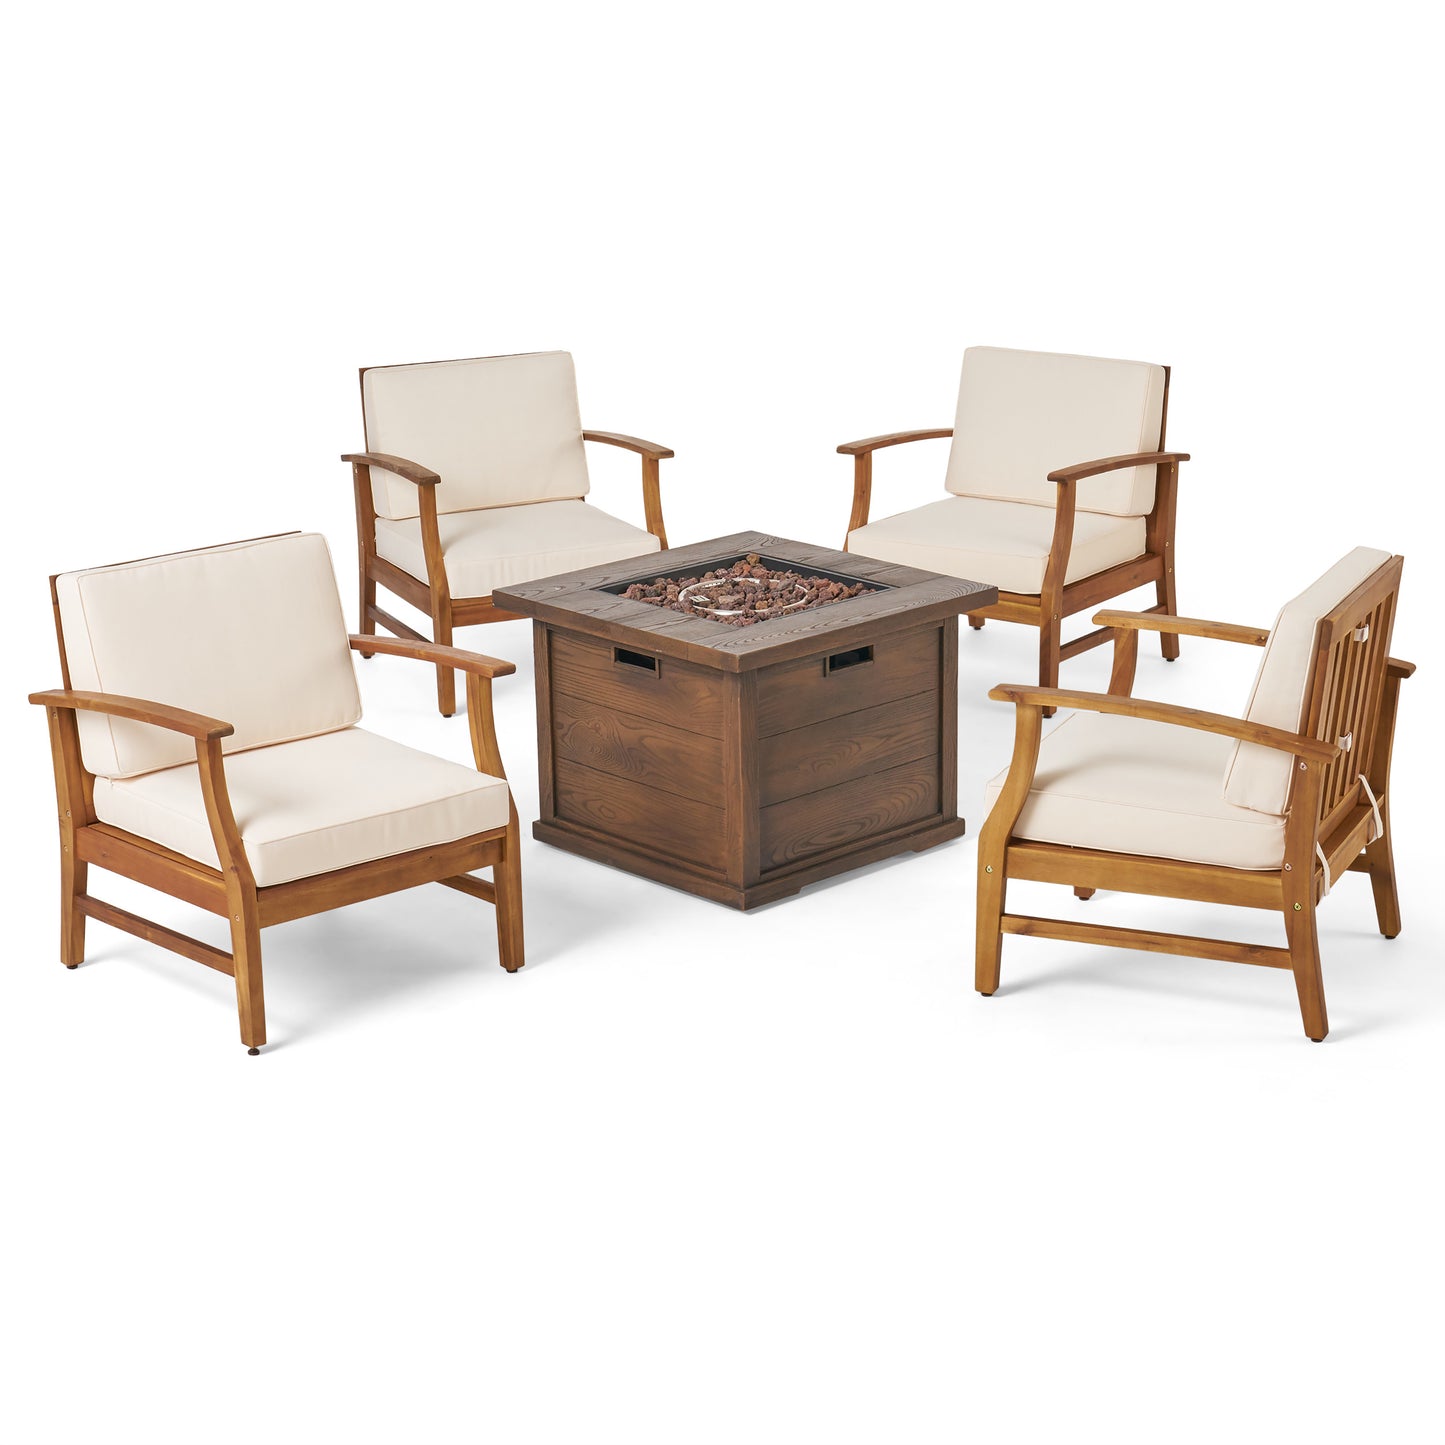 Lilith Outdoor 4 Seat Teak Finished Acacia Wood Club Chairs Fire Pit Chat Set